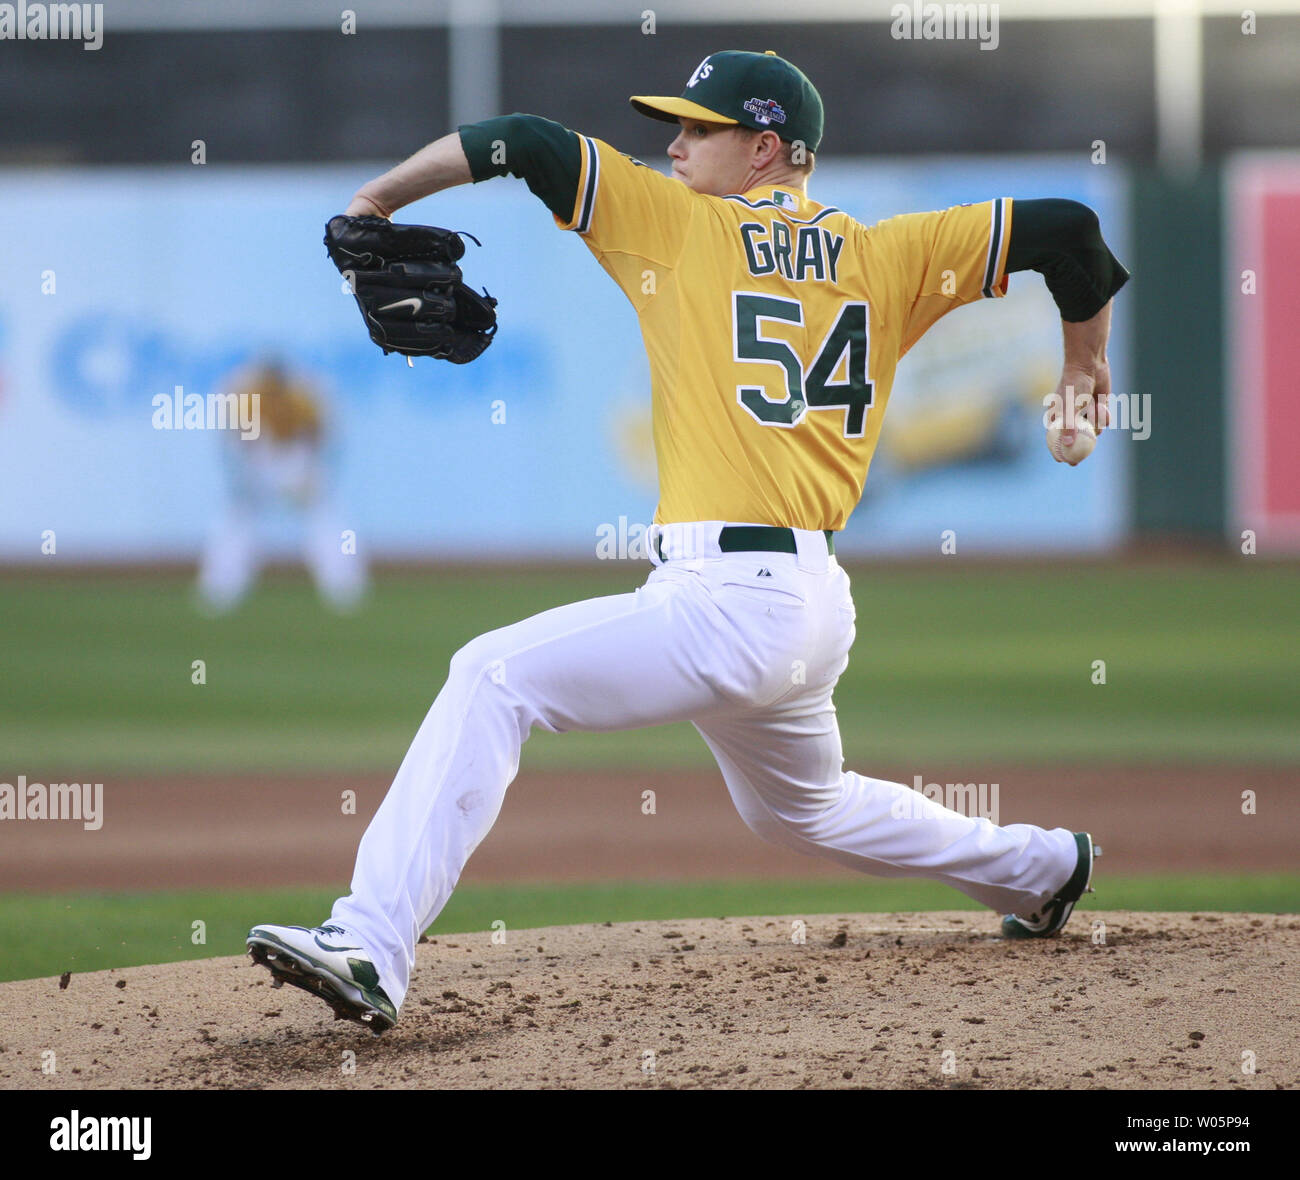 Oakland A's Sonny Gray throws in the second inning against the Detroit Tigers in game 5 of the American League Division Series at O.co Coliseum in Oakland, California on October 10, 2013.     UPI/Bruce Gordon Stock Photo